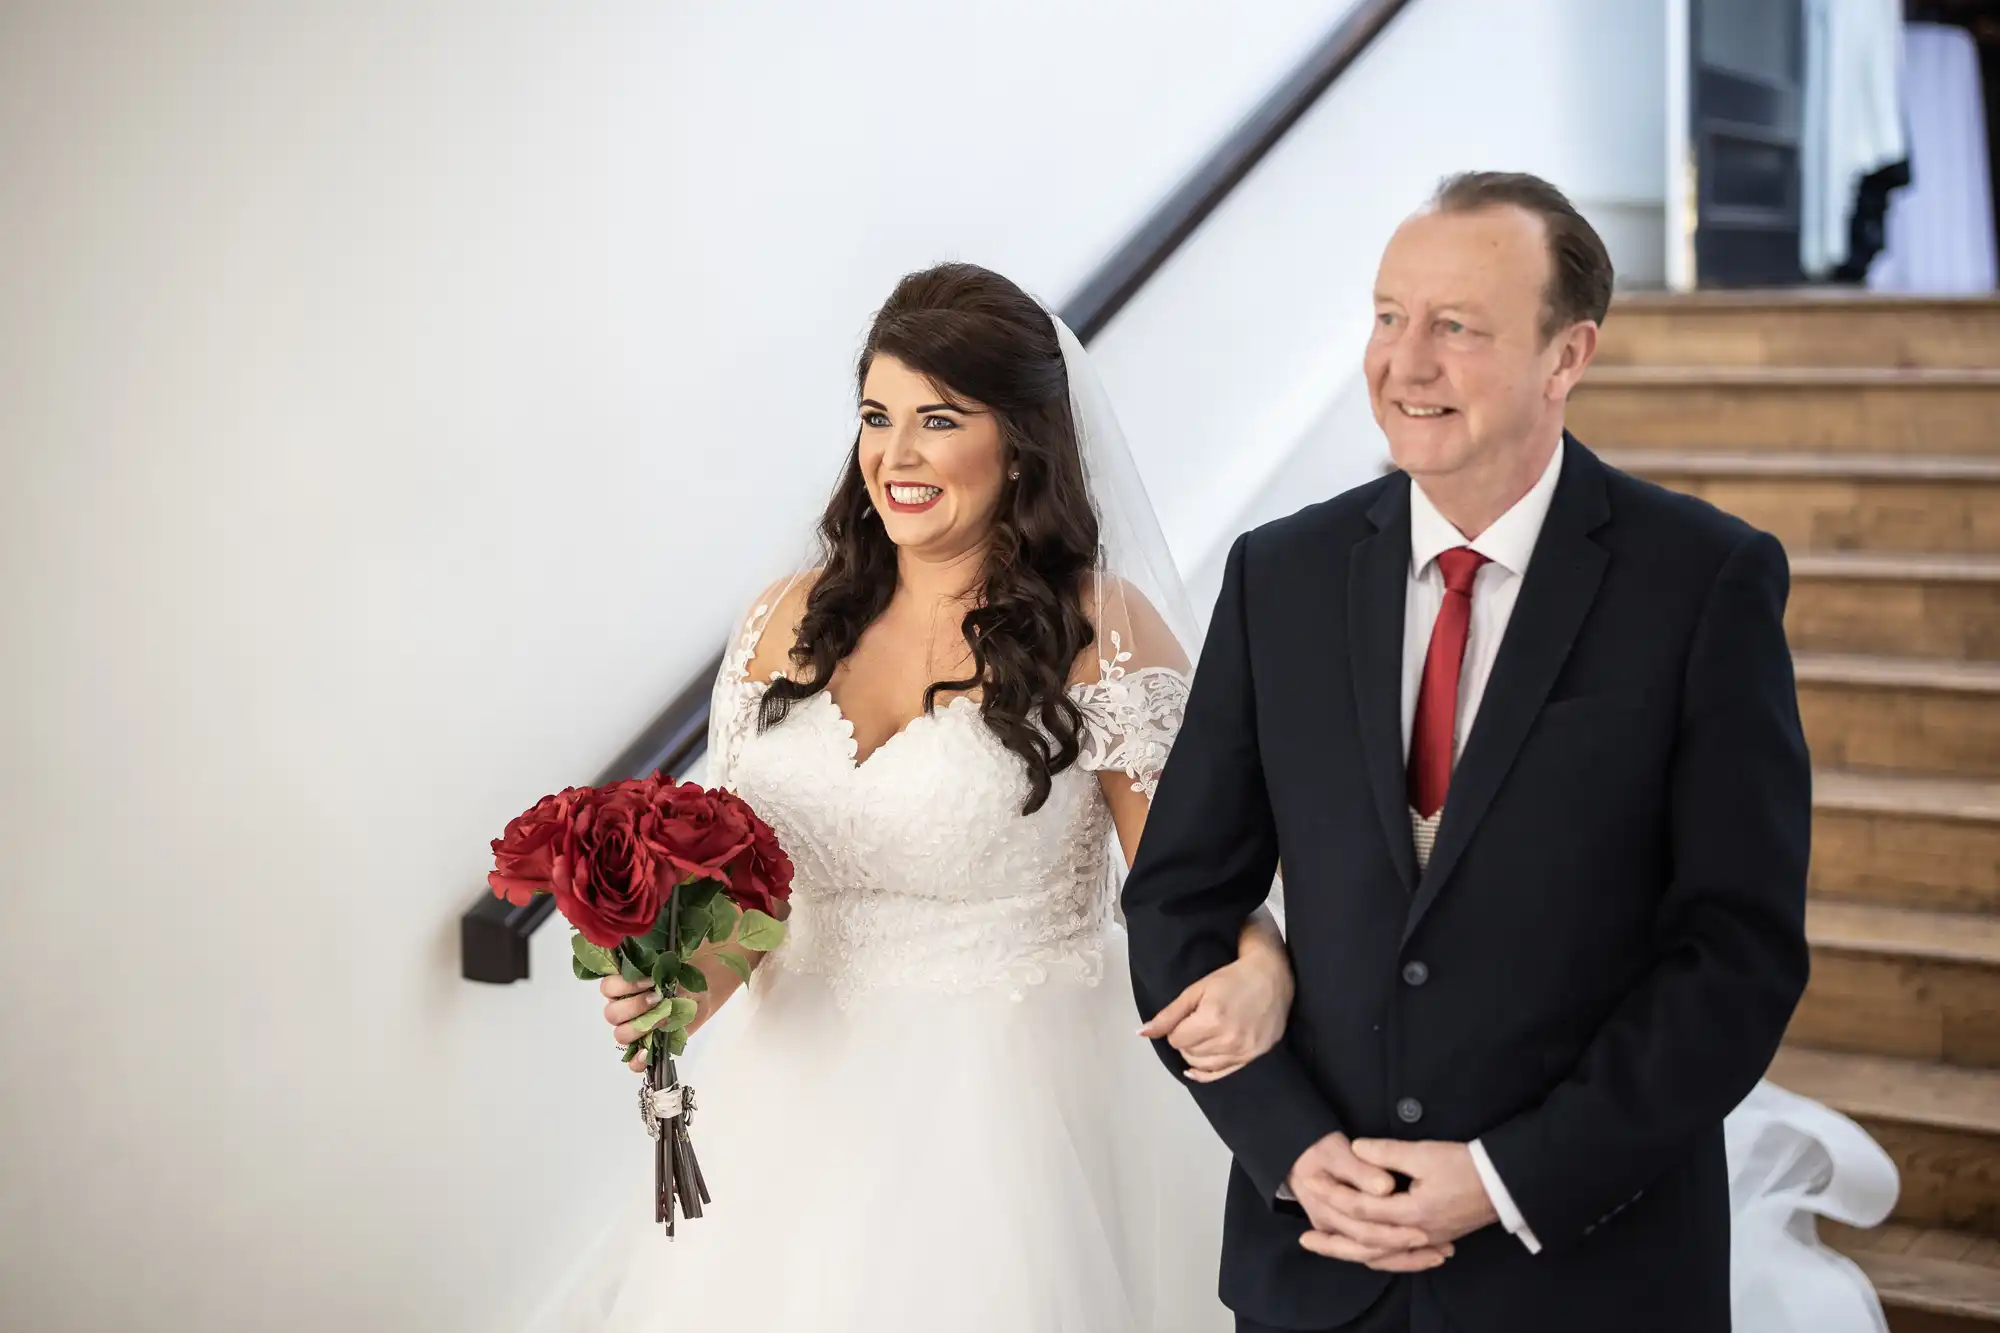 A bride in a white wedding dress, holding a bouquet of red roses, walks arm-in-arm with a man in a black suit and red tie, descending a staircase.